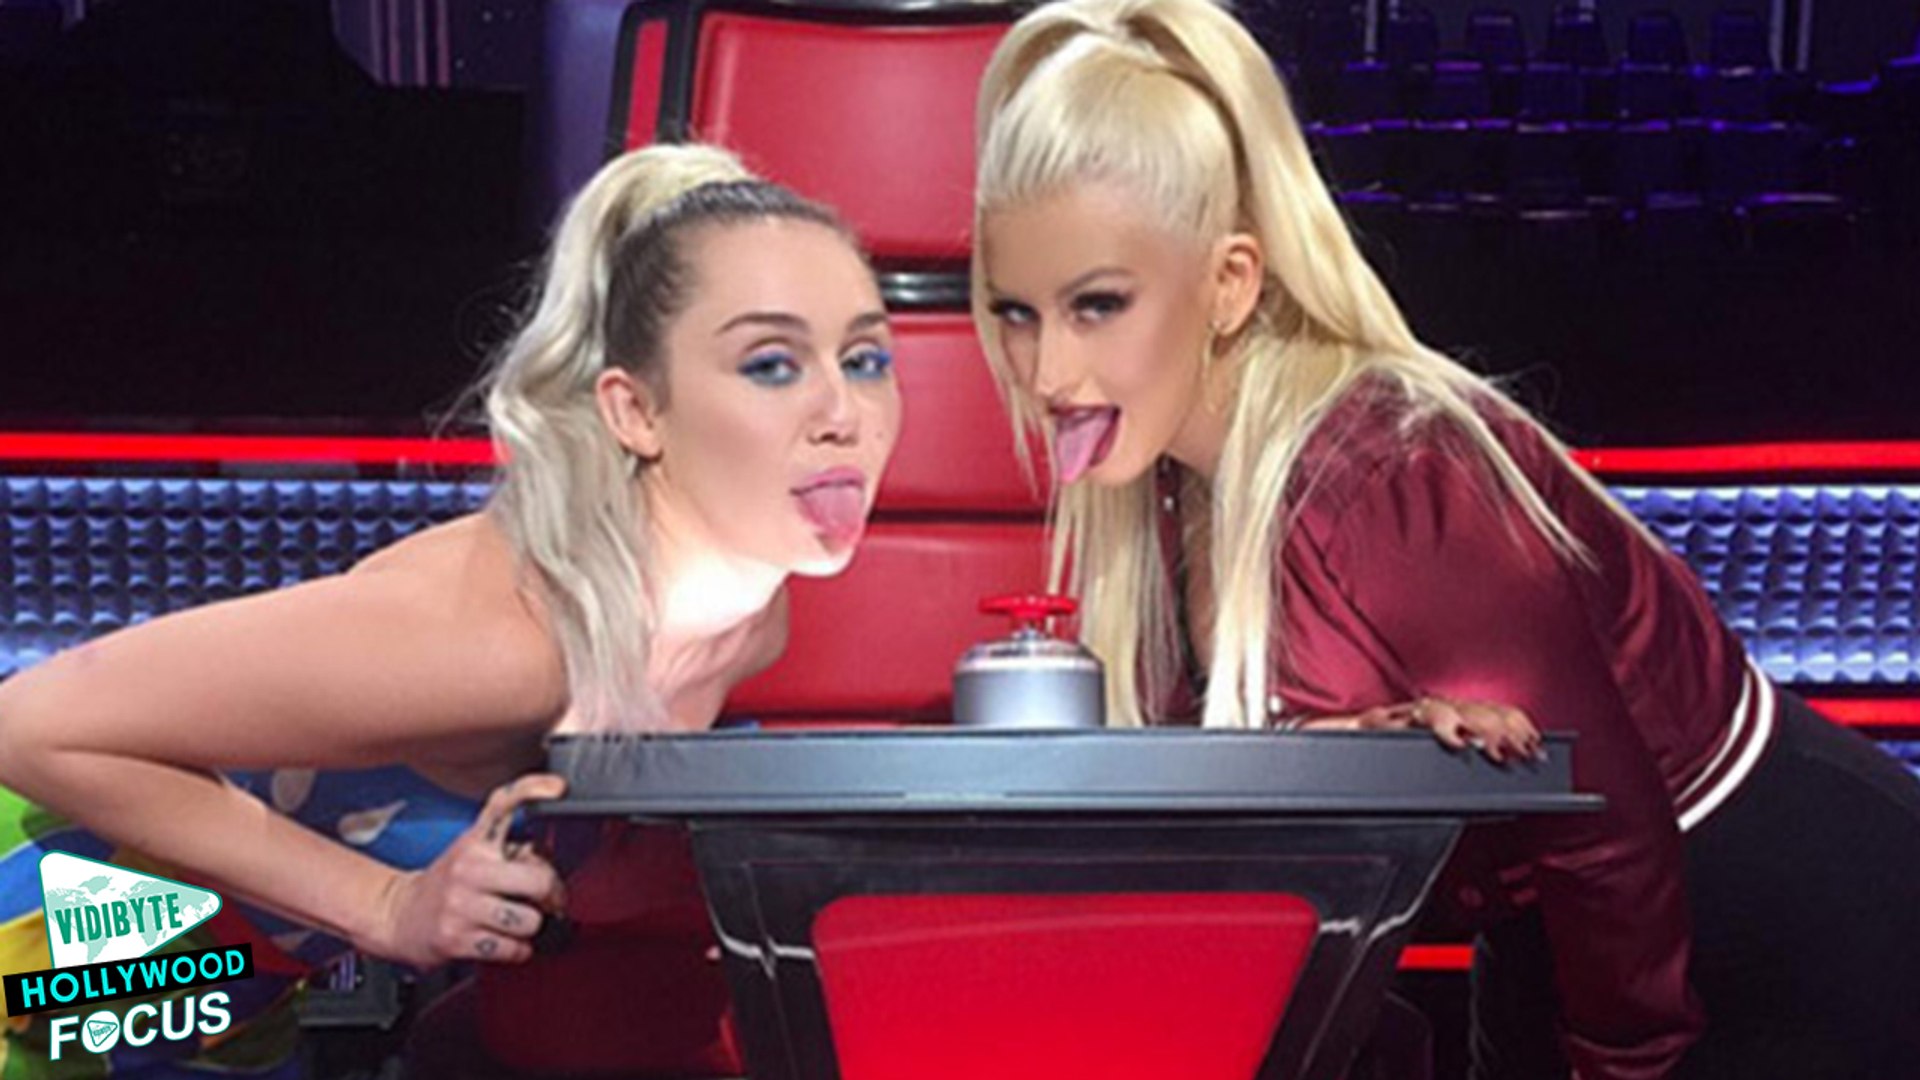 Miley Cyrus Joins 'The Voice' As Coach